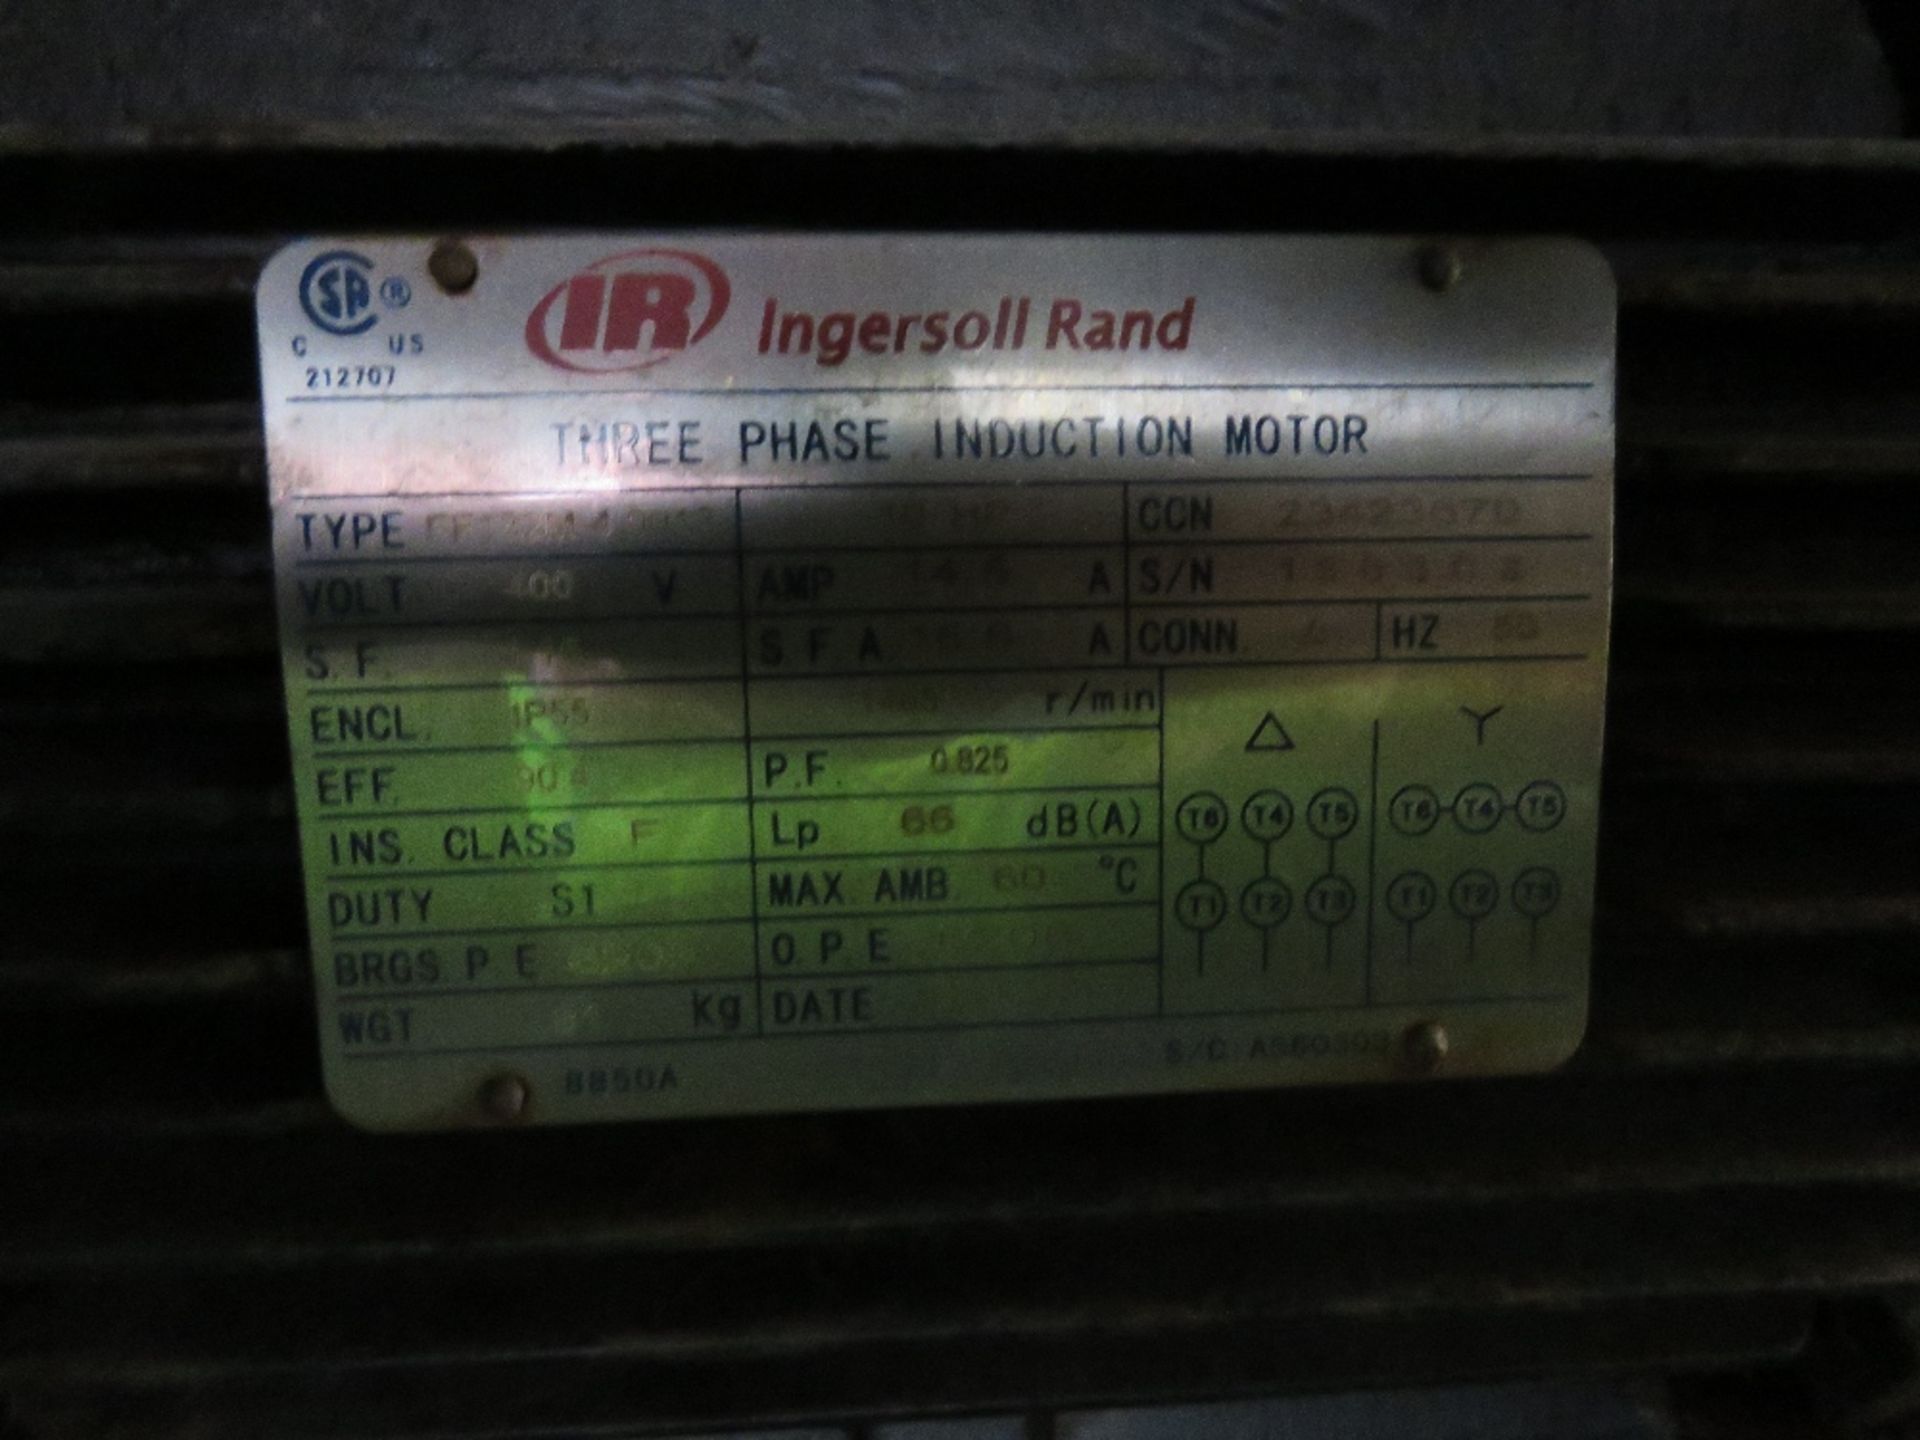 INGERSOLL RAND R132I LARGE CAPACITY COMPRESSOR, YEAR 2016 BUILD, 7.5BAR RATED. WORKING WHEN REMOVED. - Image 11 of 17